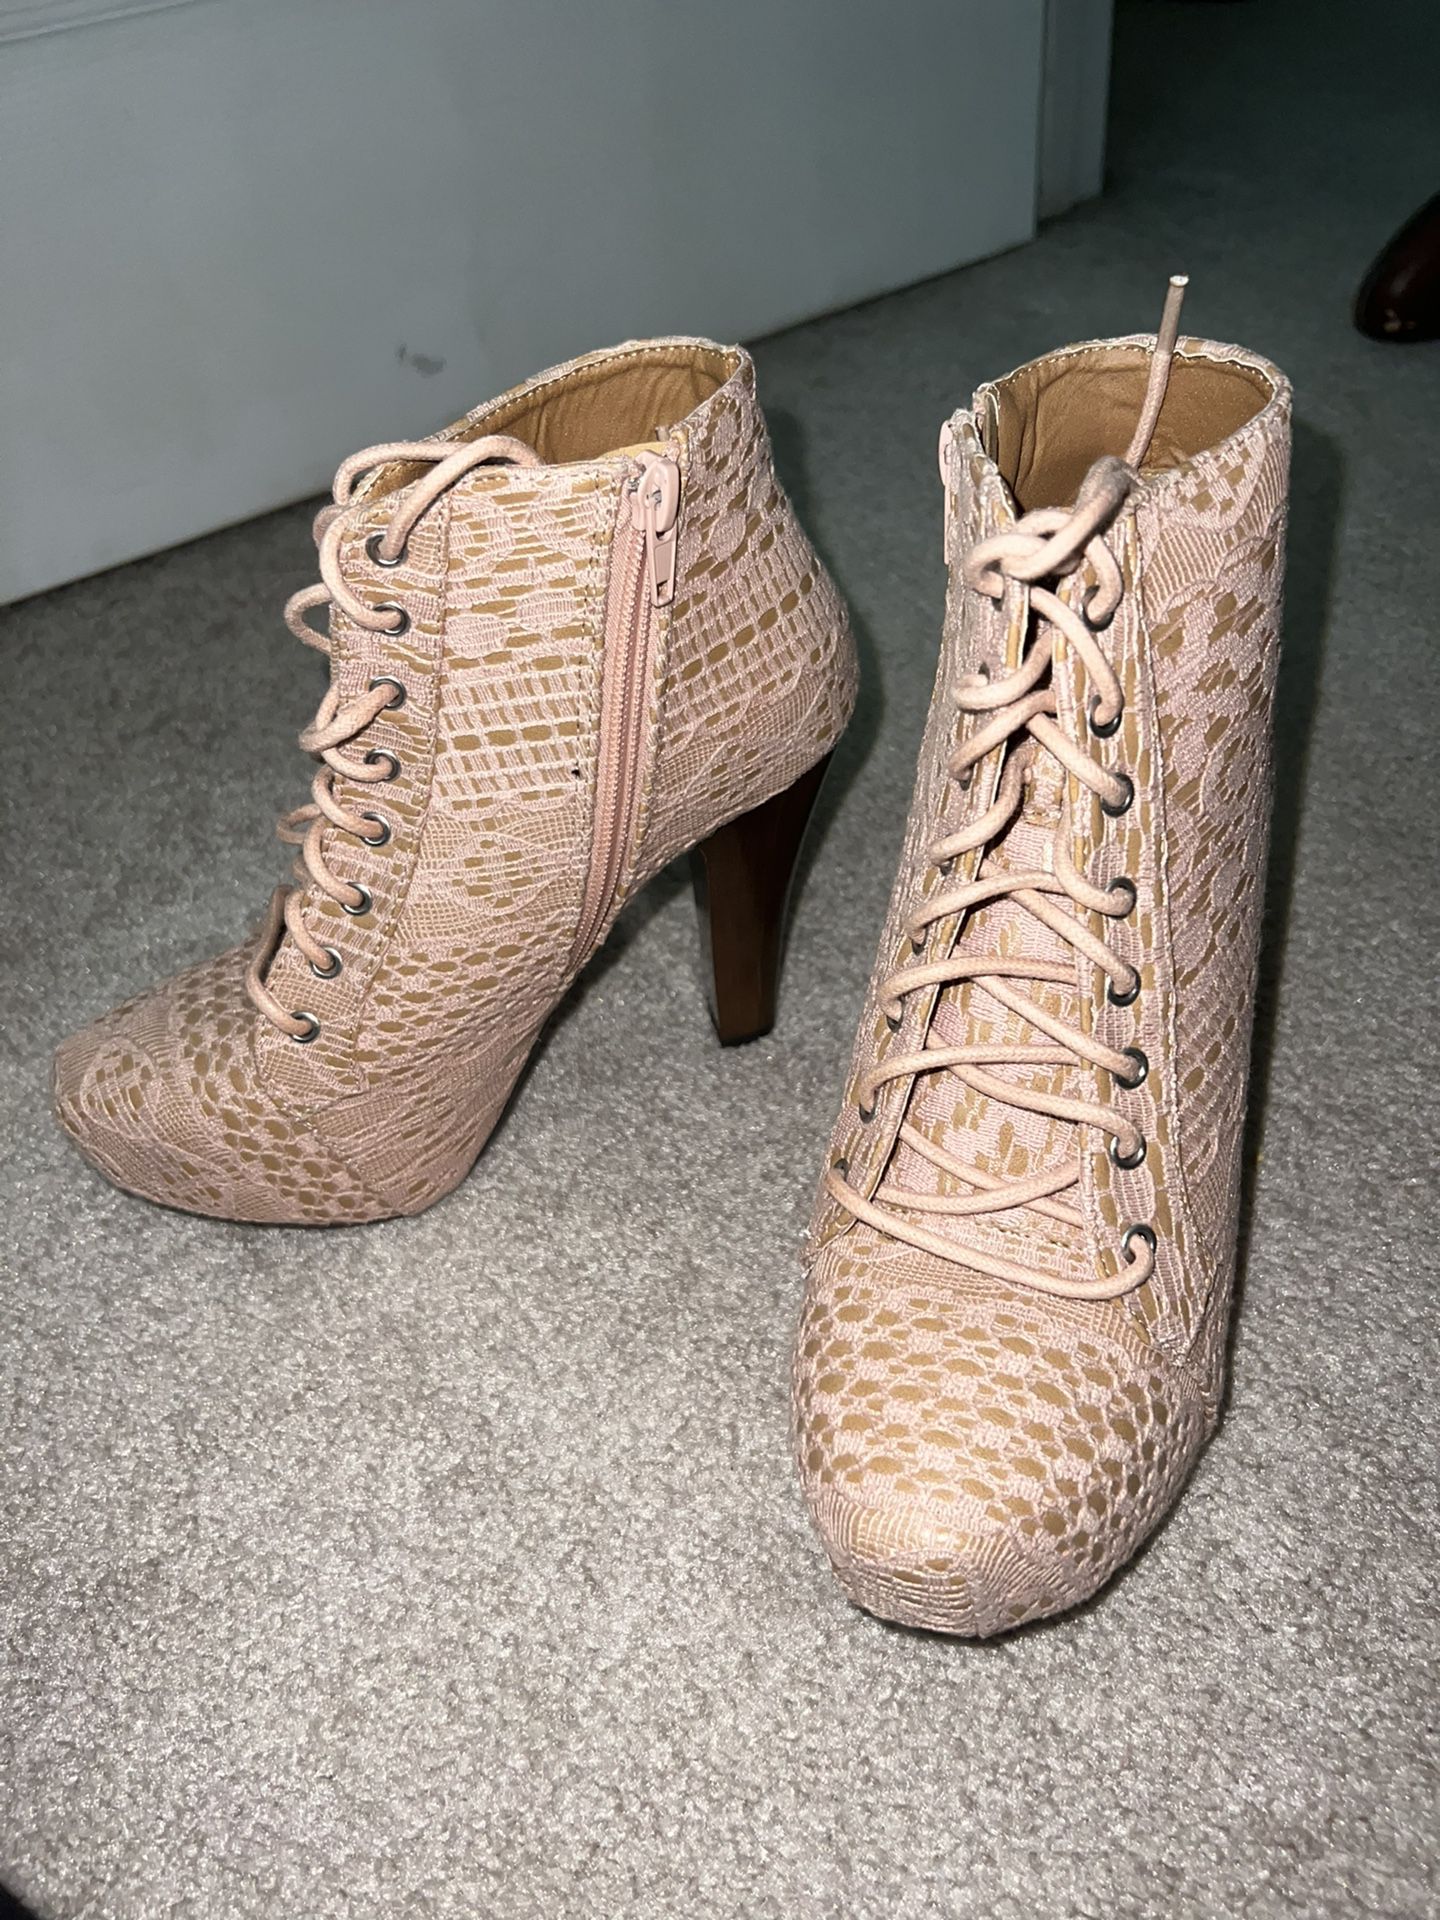 NEW Lace Boot Heels 